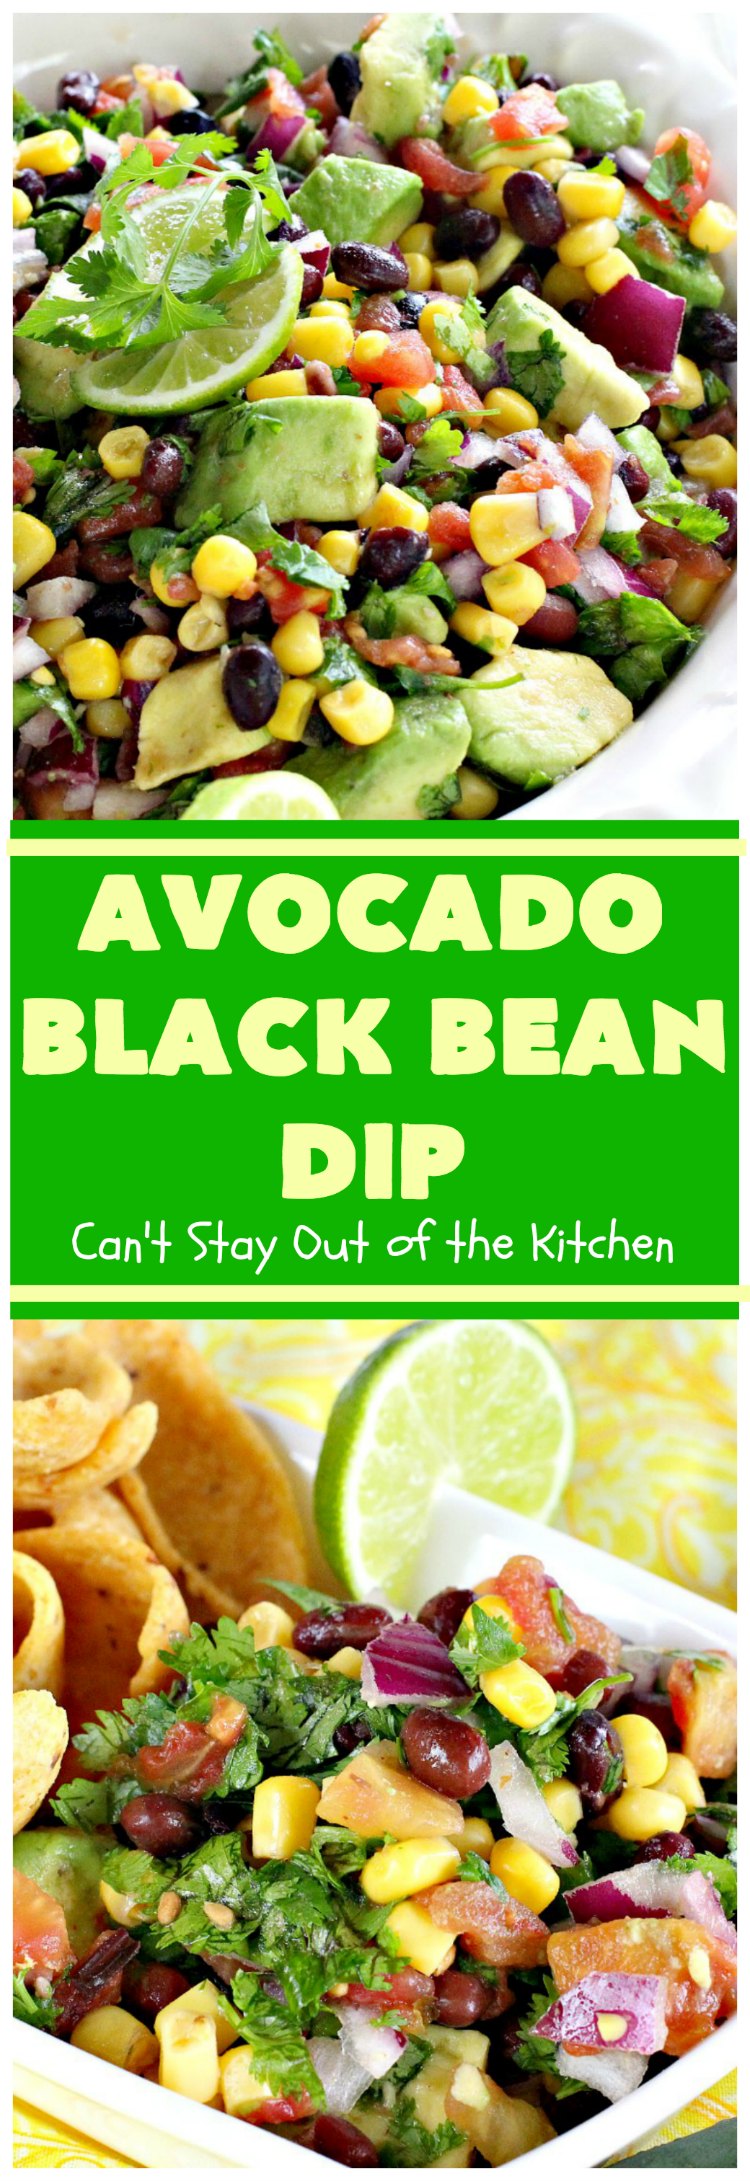 Avocado Black Bean Dip | Can't Stay Out of the Kitchen